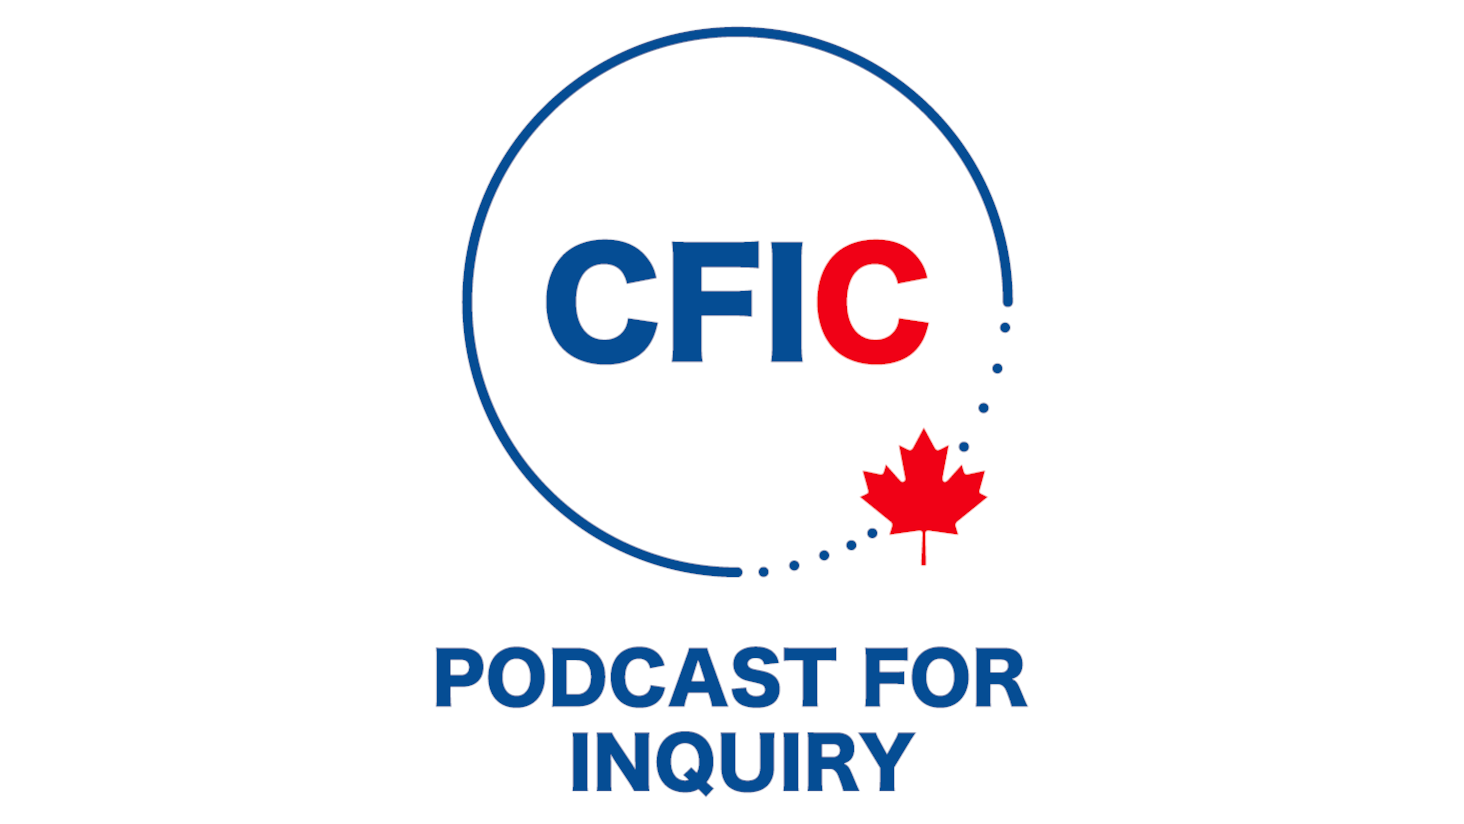 Podcast for Inquiry Turns One